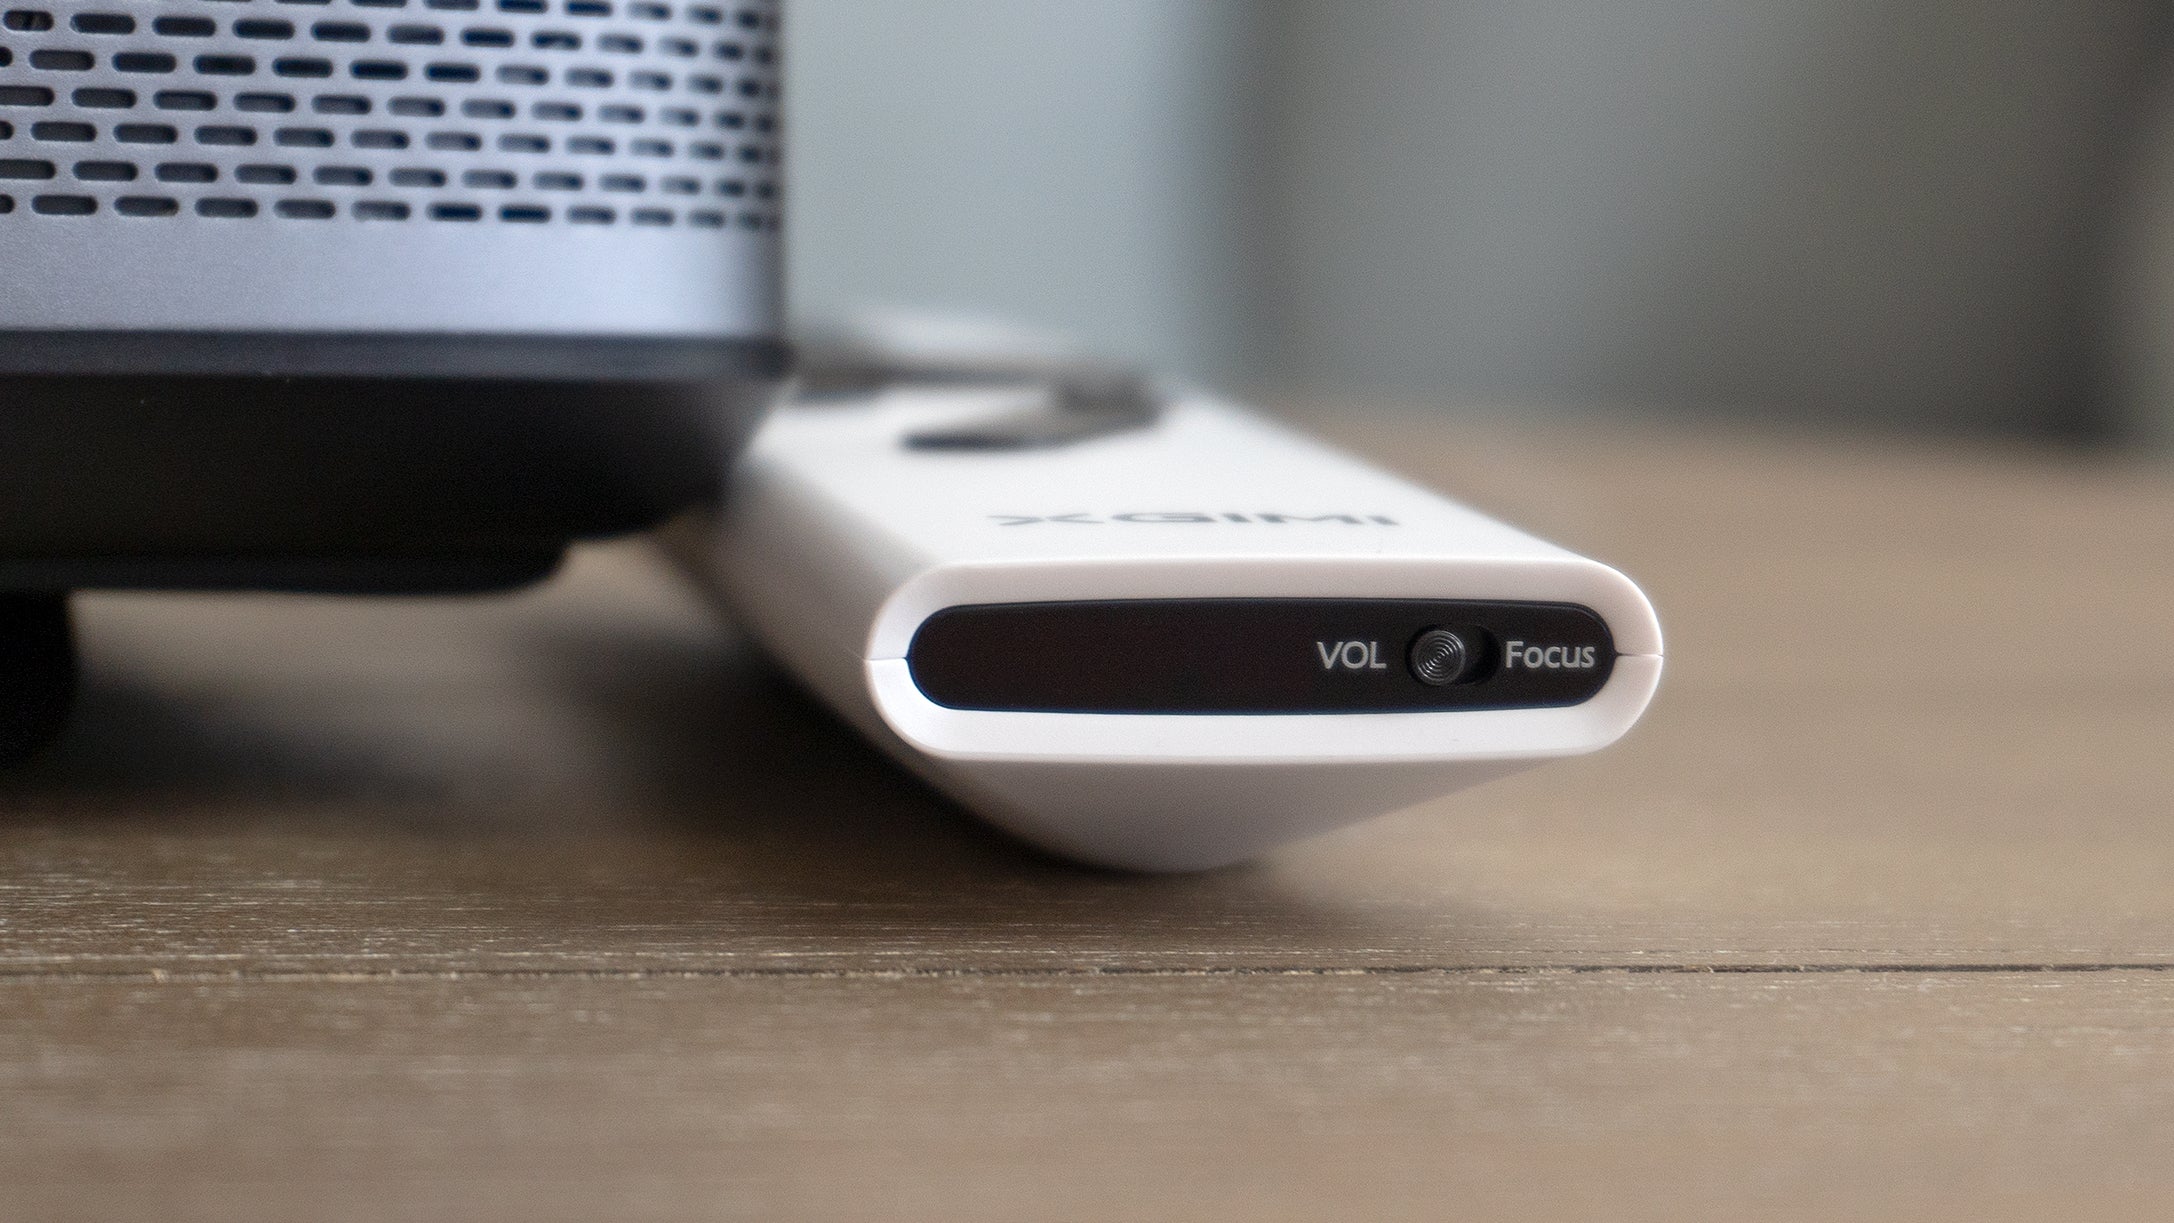 Quickly accessing manual focus controls on the XGIMI Halo+'s remote involves flipping a toggle switch hidden on the bottom edge of the remote. (Photo: Andrew Liszewski | Gizmodo)